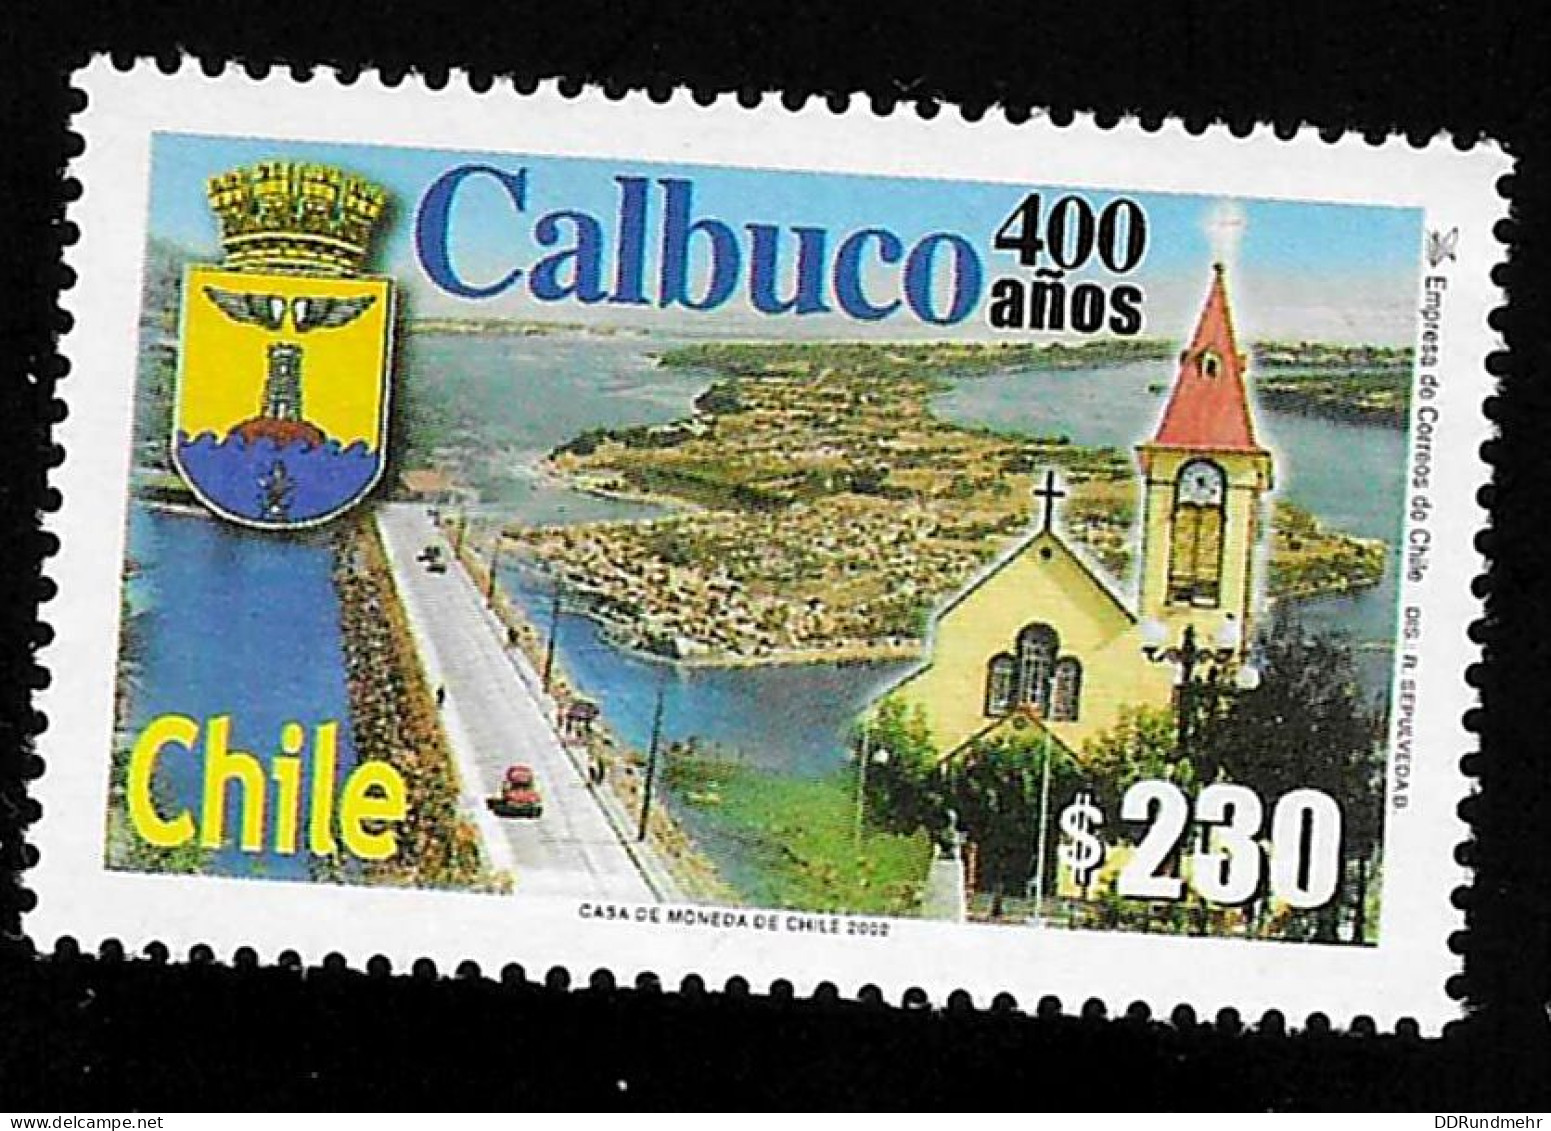 2002 Calbuco  Michel CL 2066 Stamp Number CL 1391 Yvert Et Tellier CL 1633 Stanley Gibbons CL 2043 Xx MNH - Chili